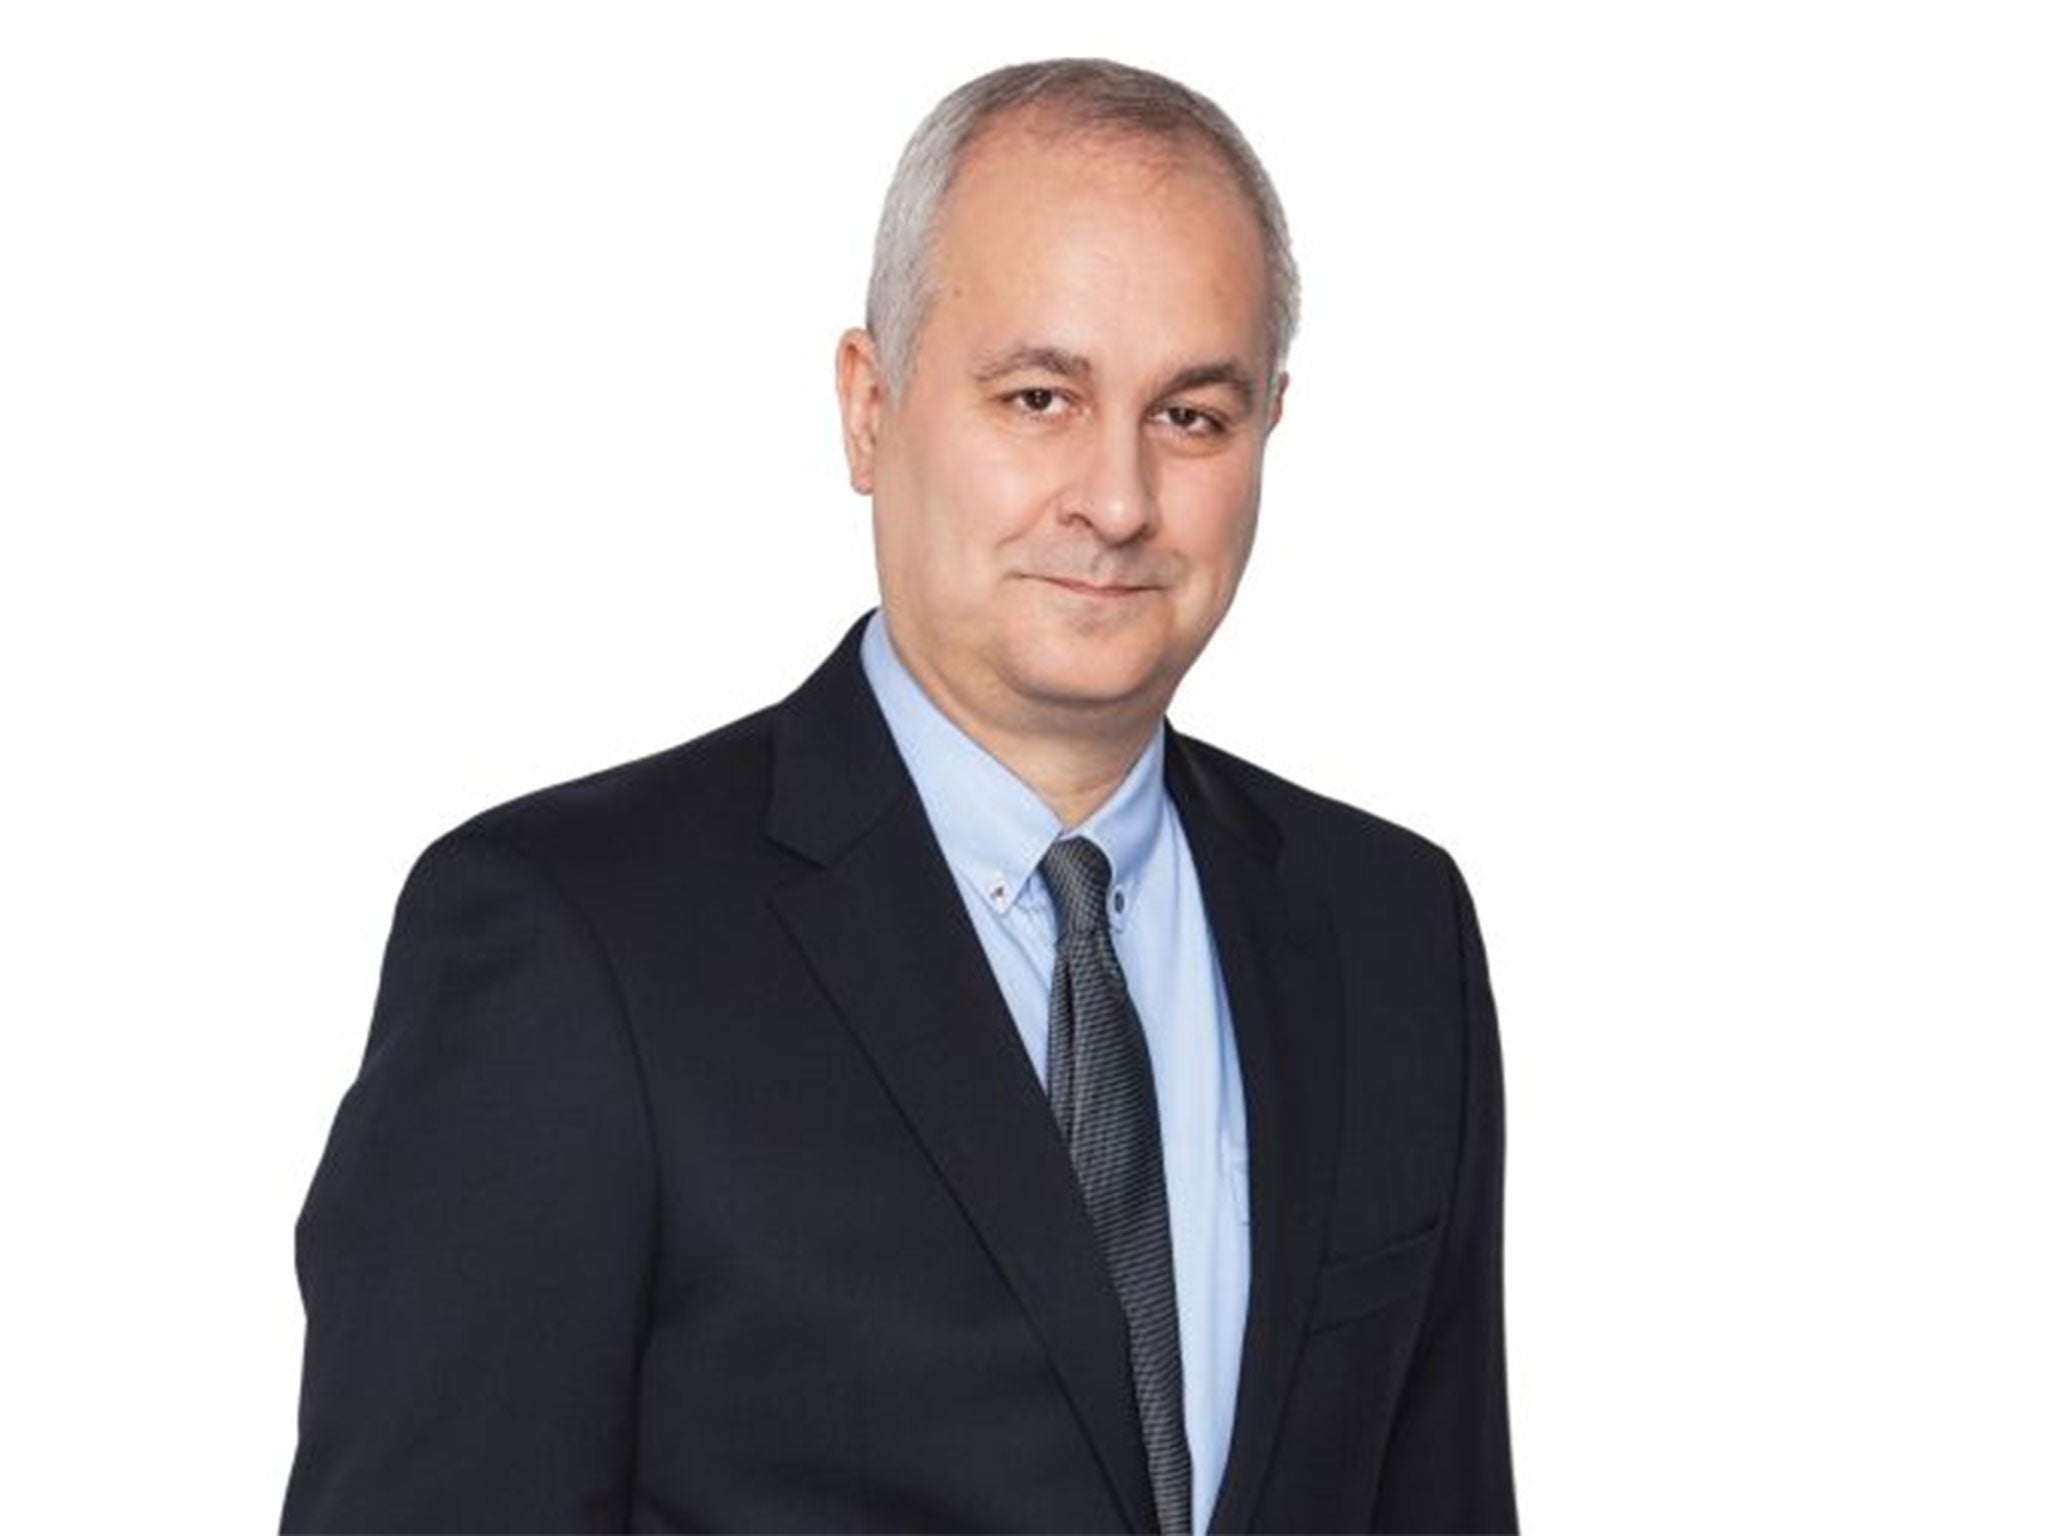 Publisher and political blogger Iain Dale